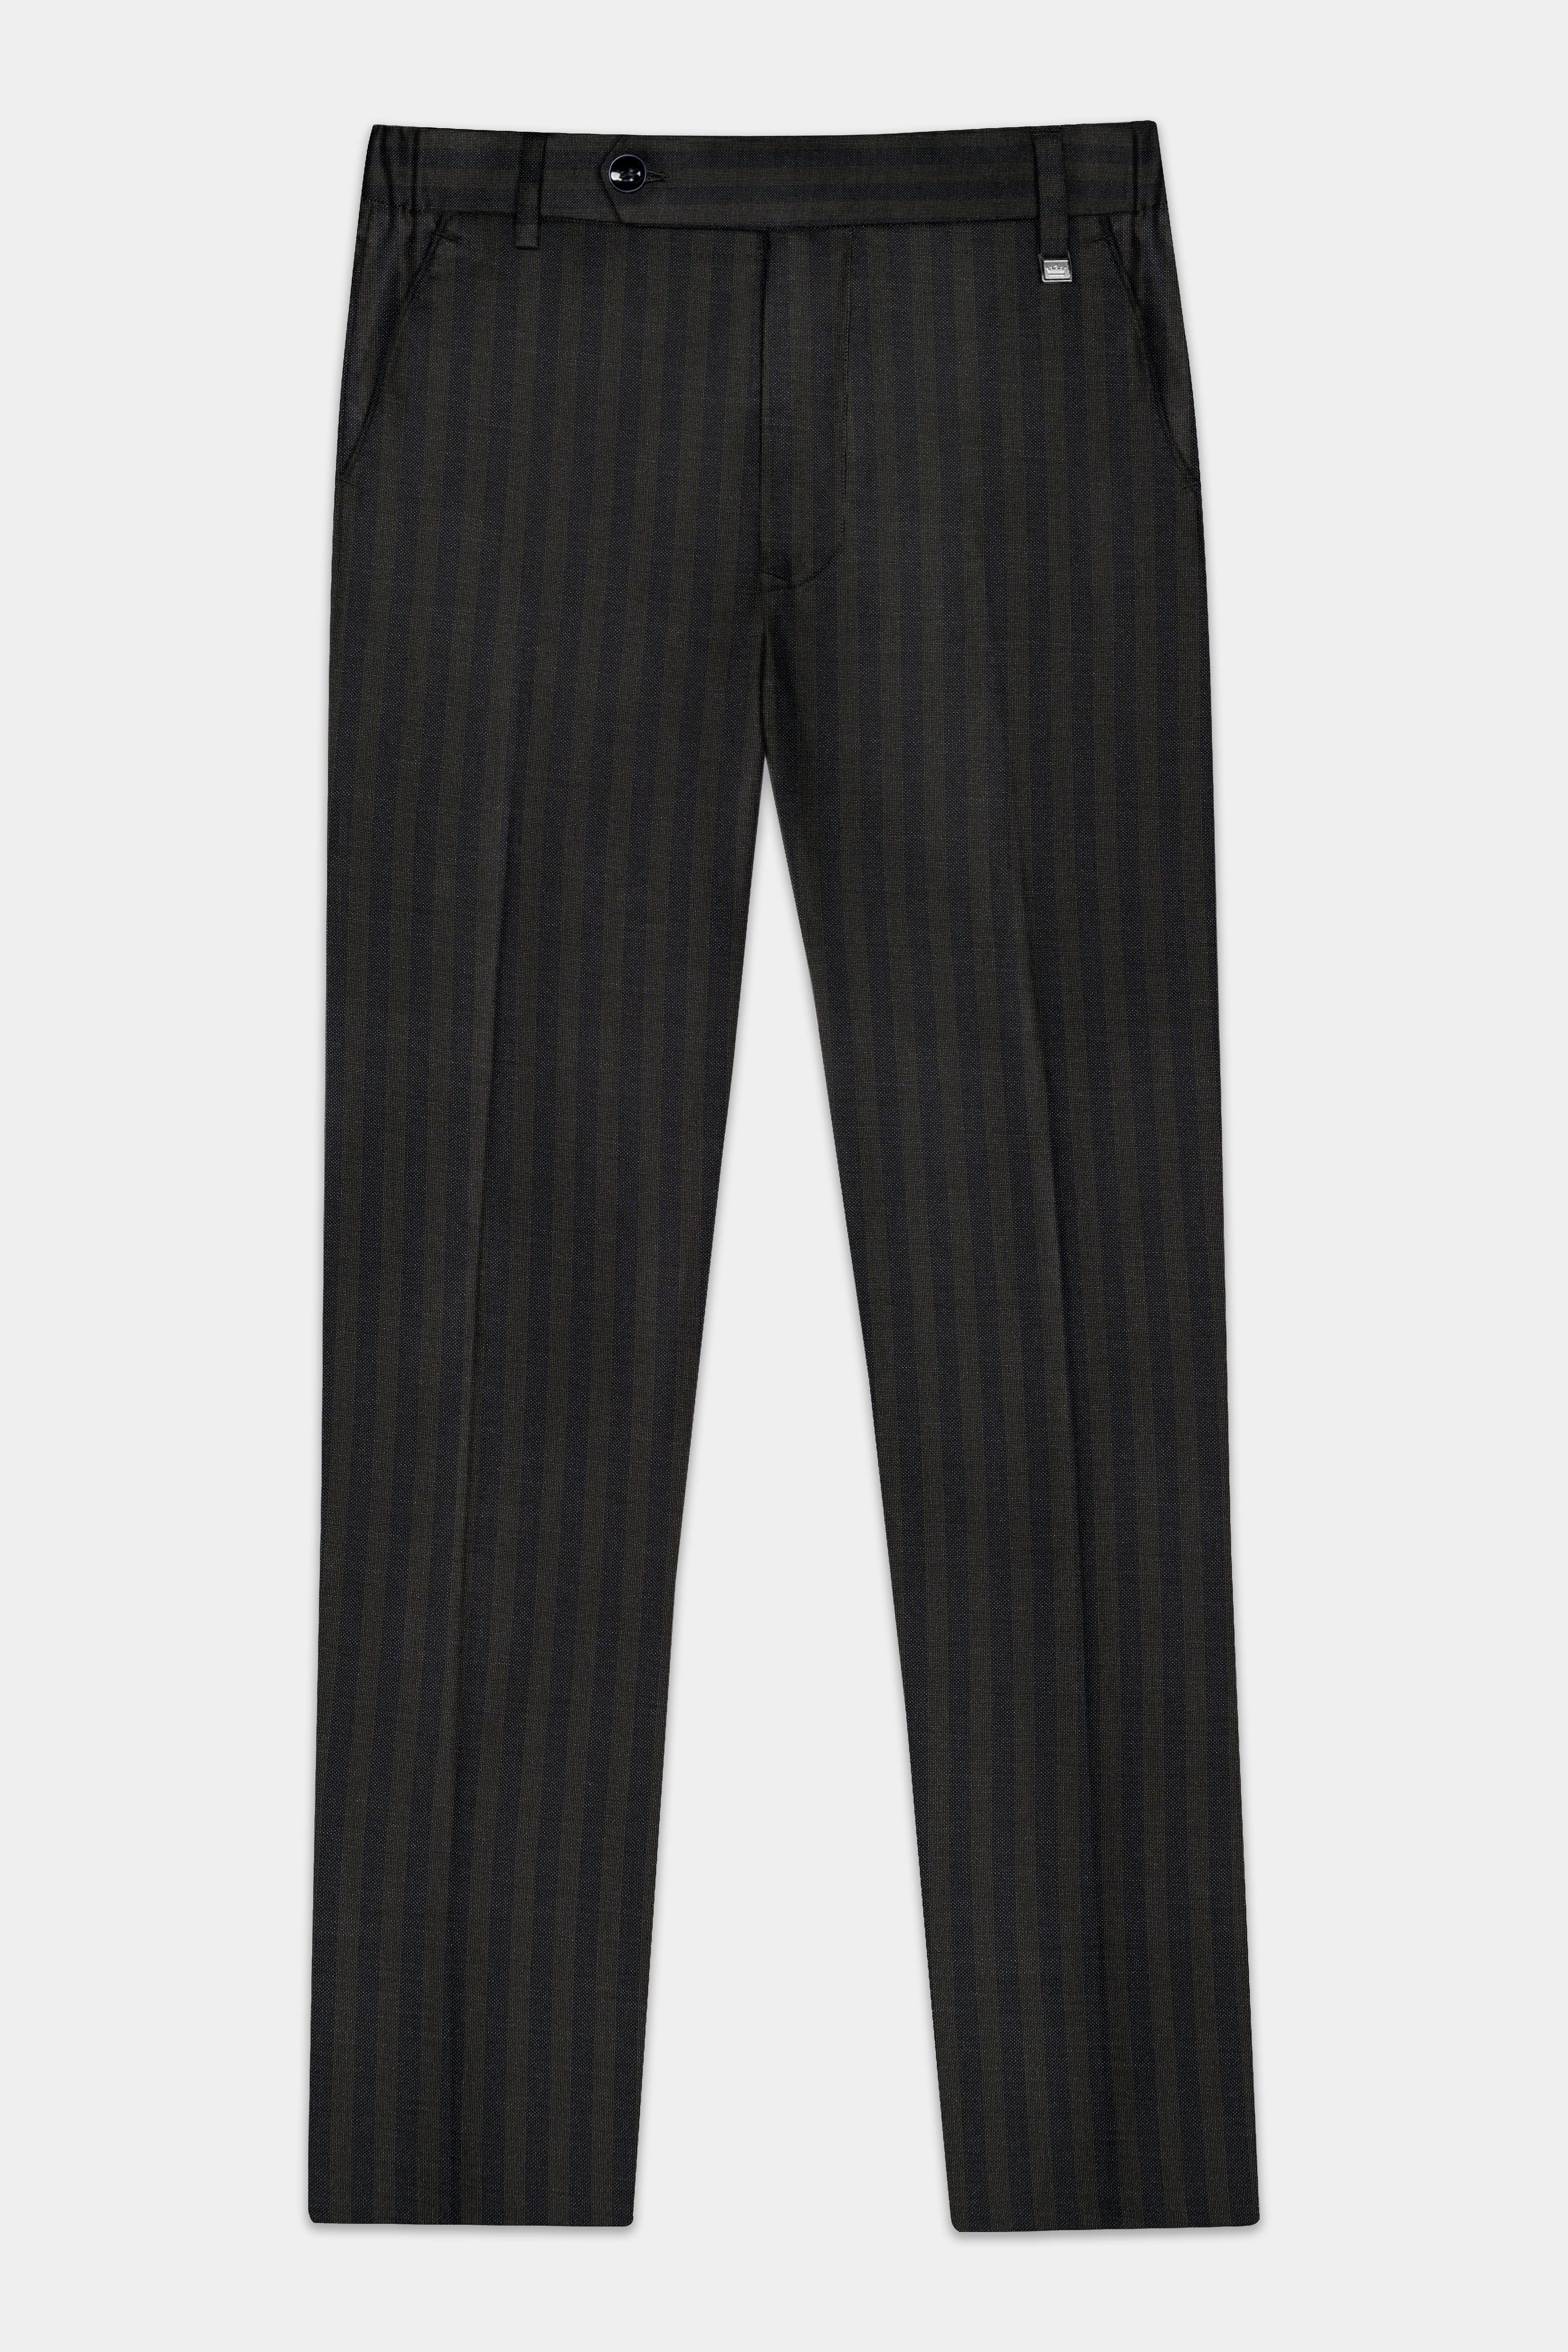 Heavy Green with Black Striped Wool Blend Pant